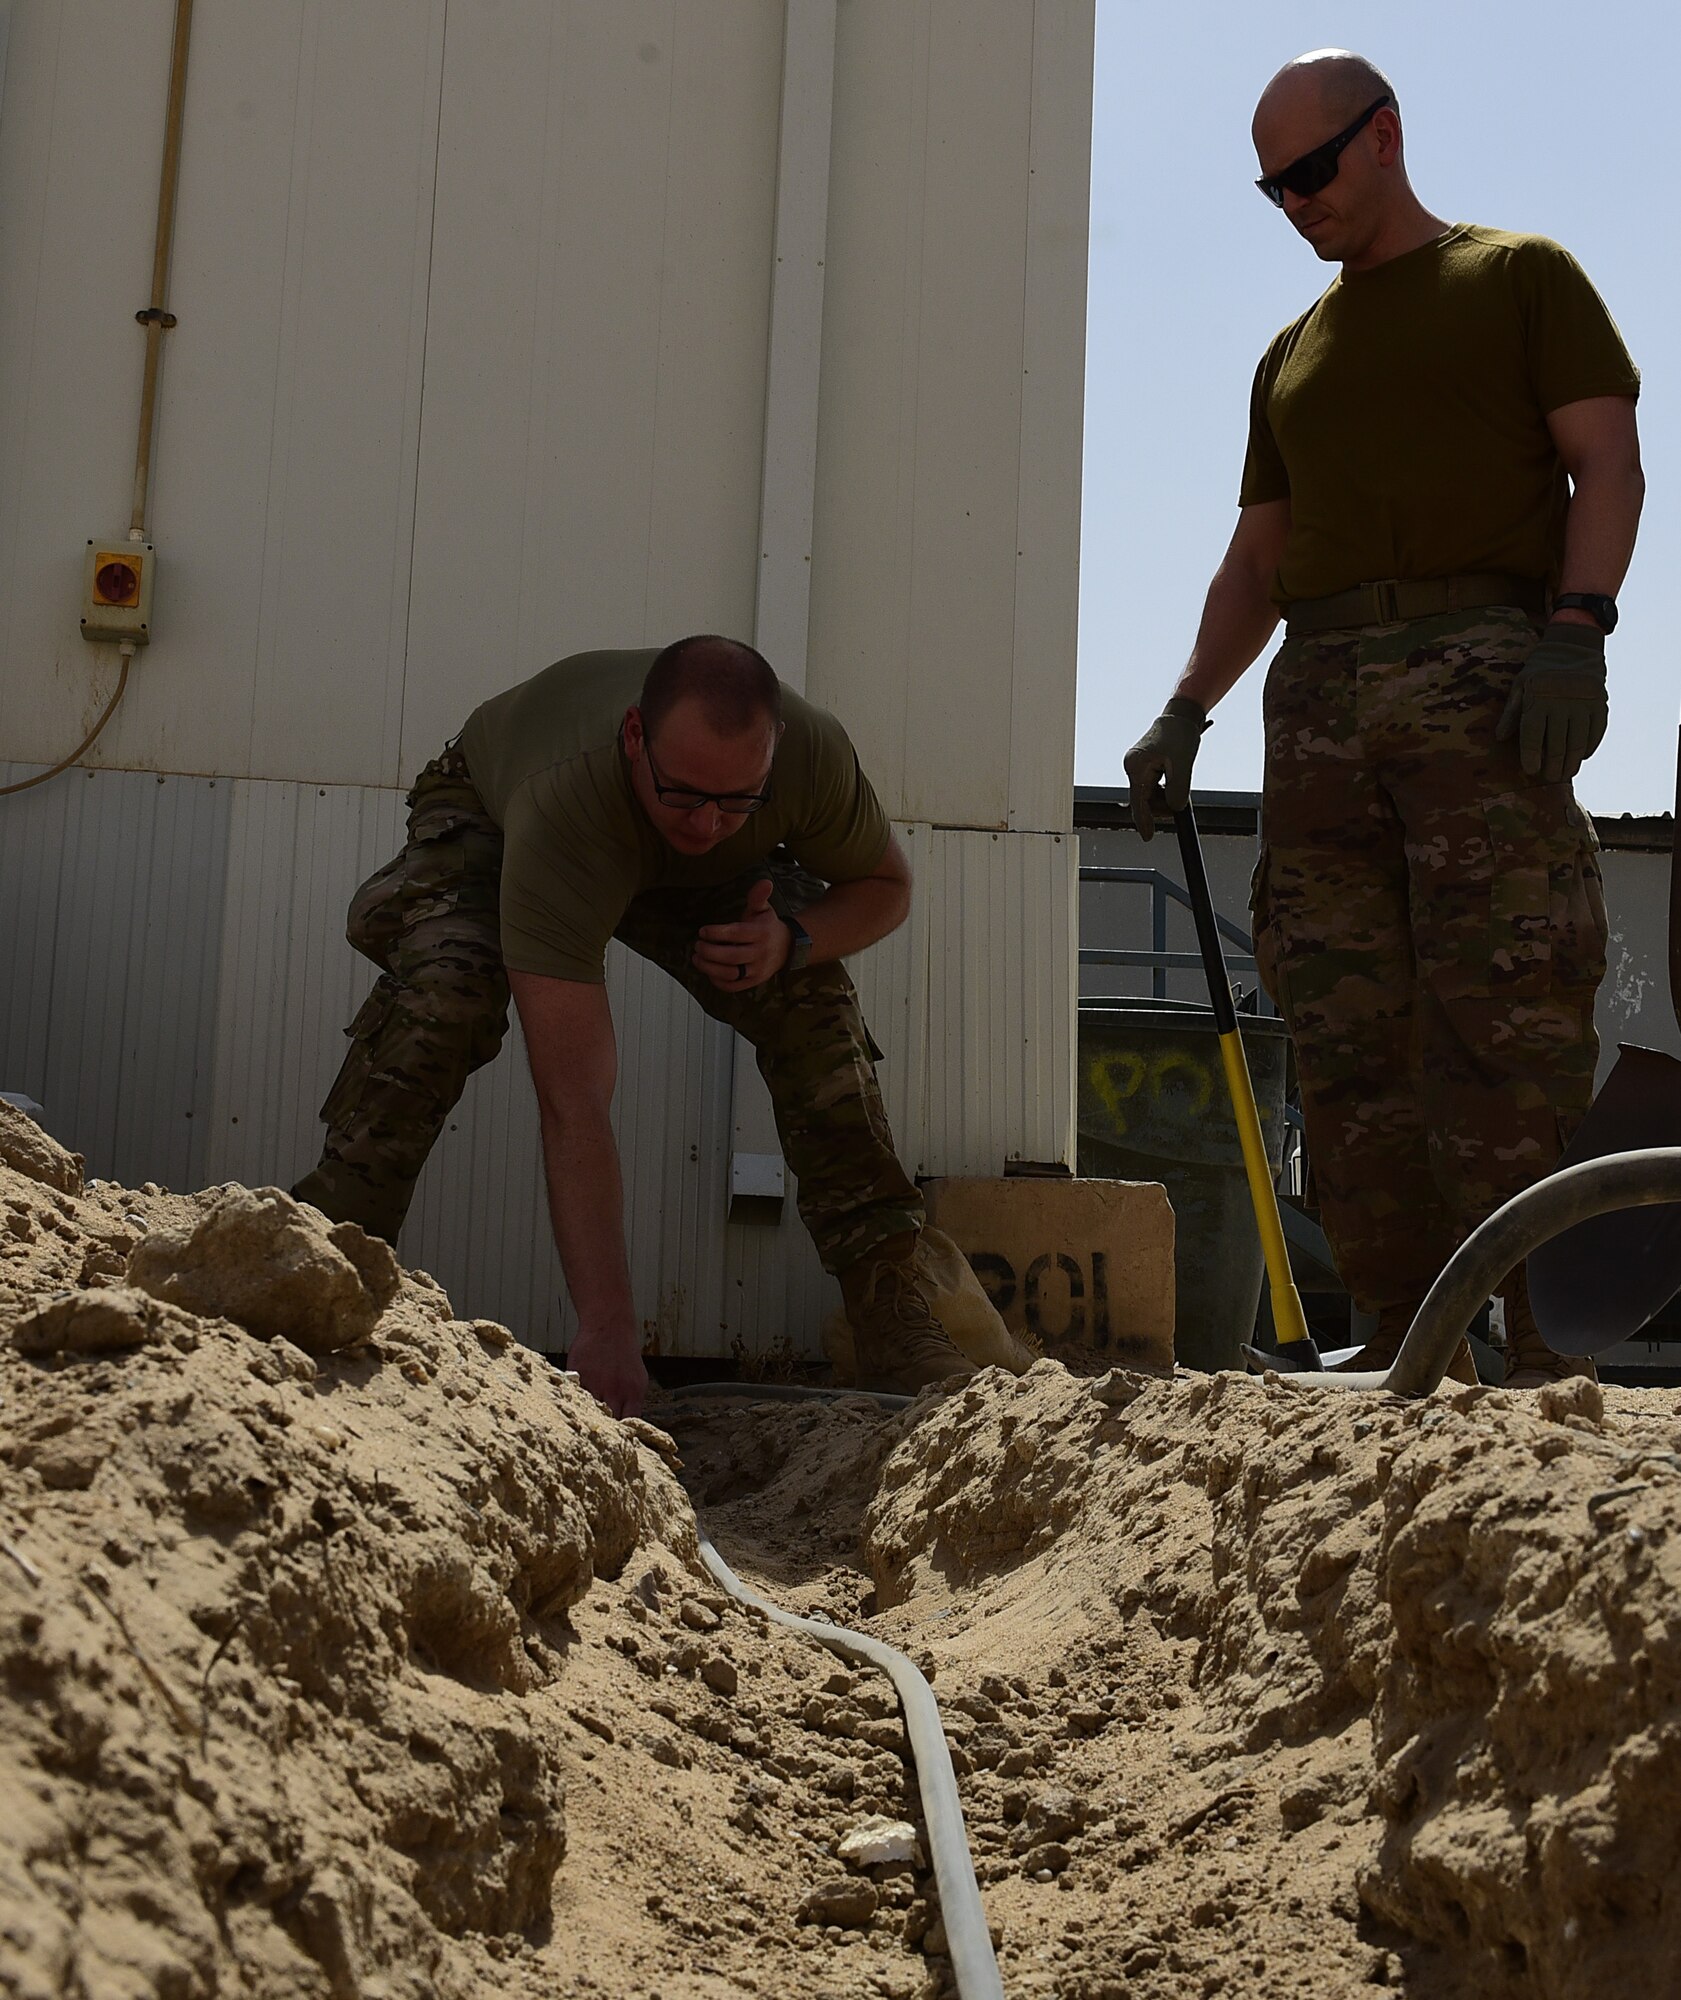 Two Airman place a cable in a hole in the ground